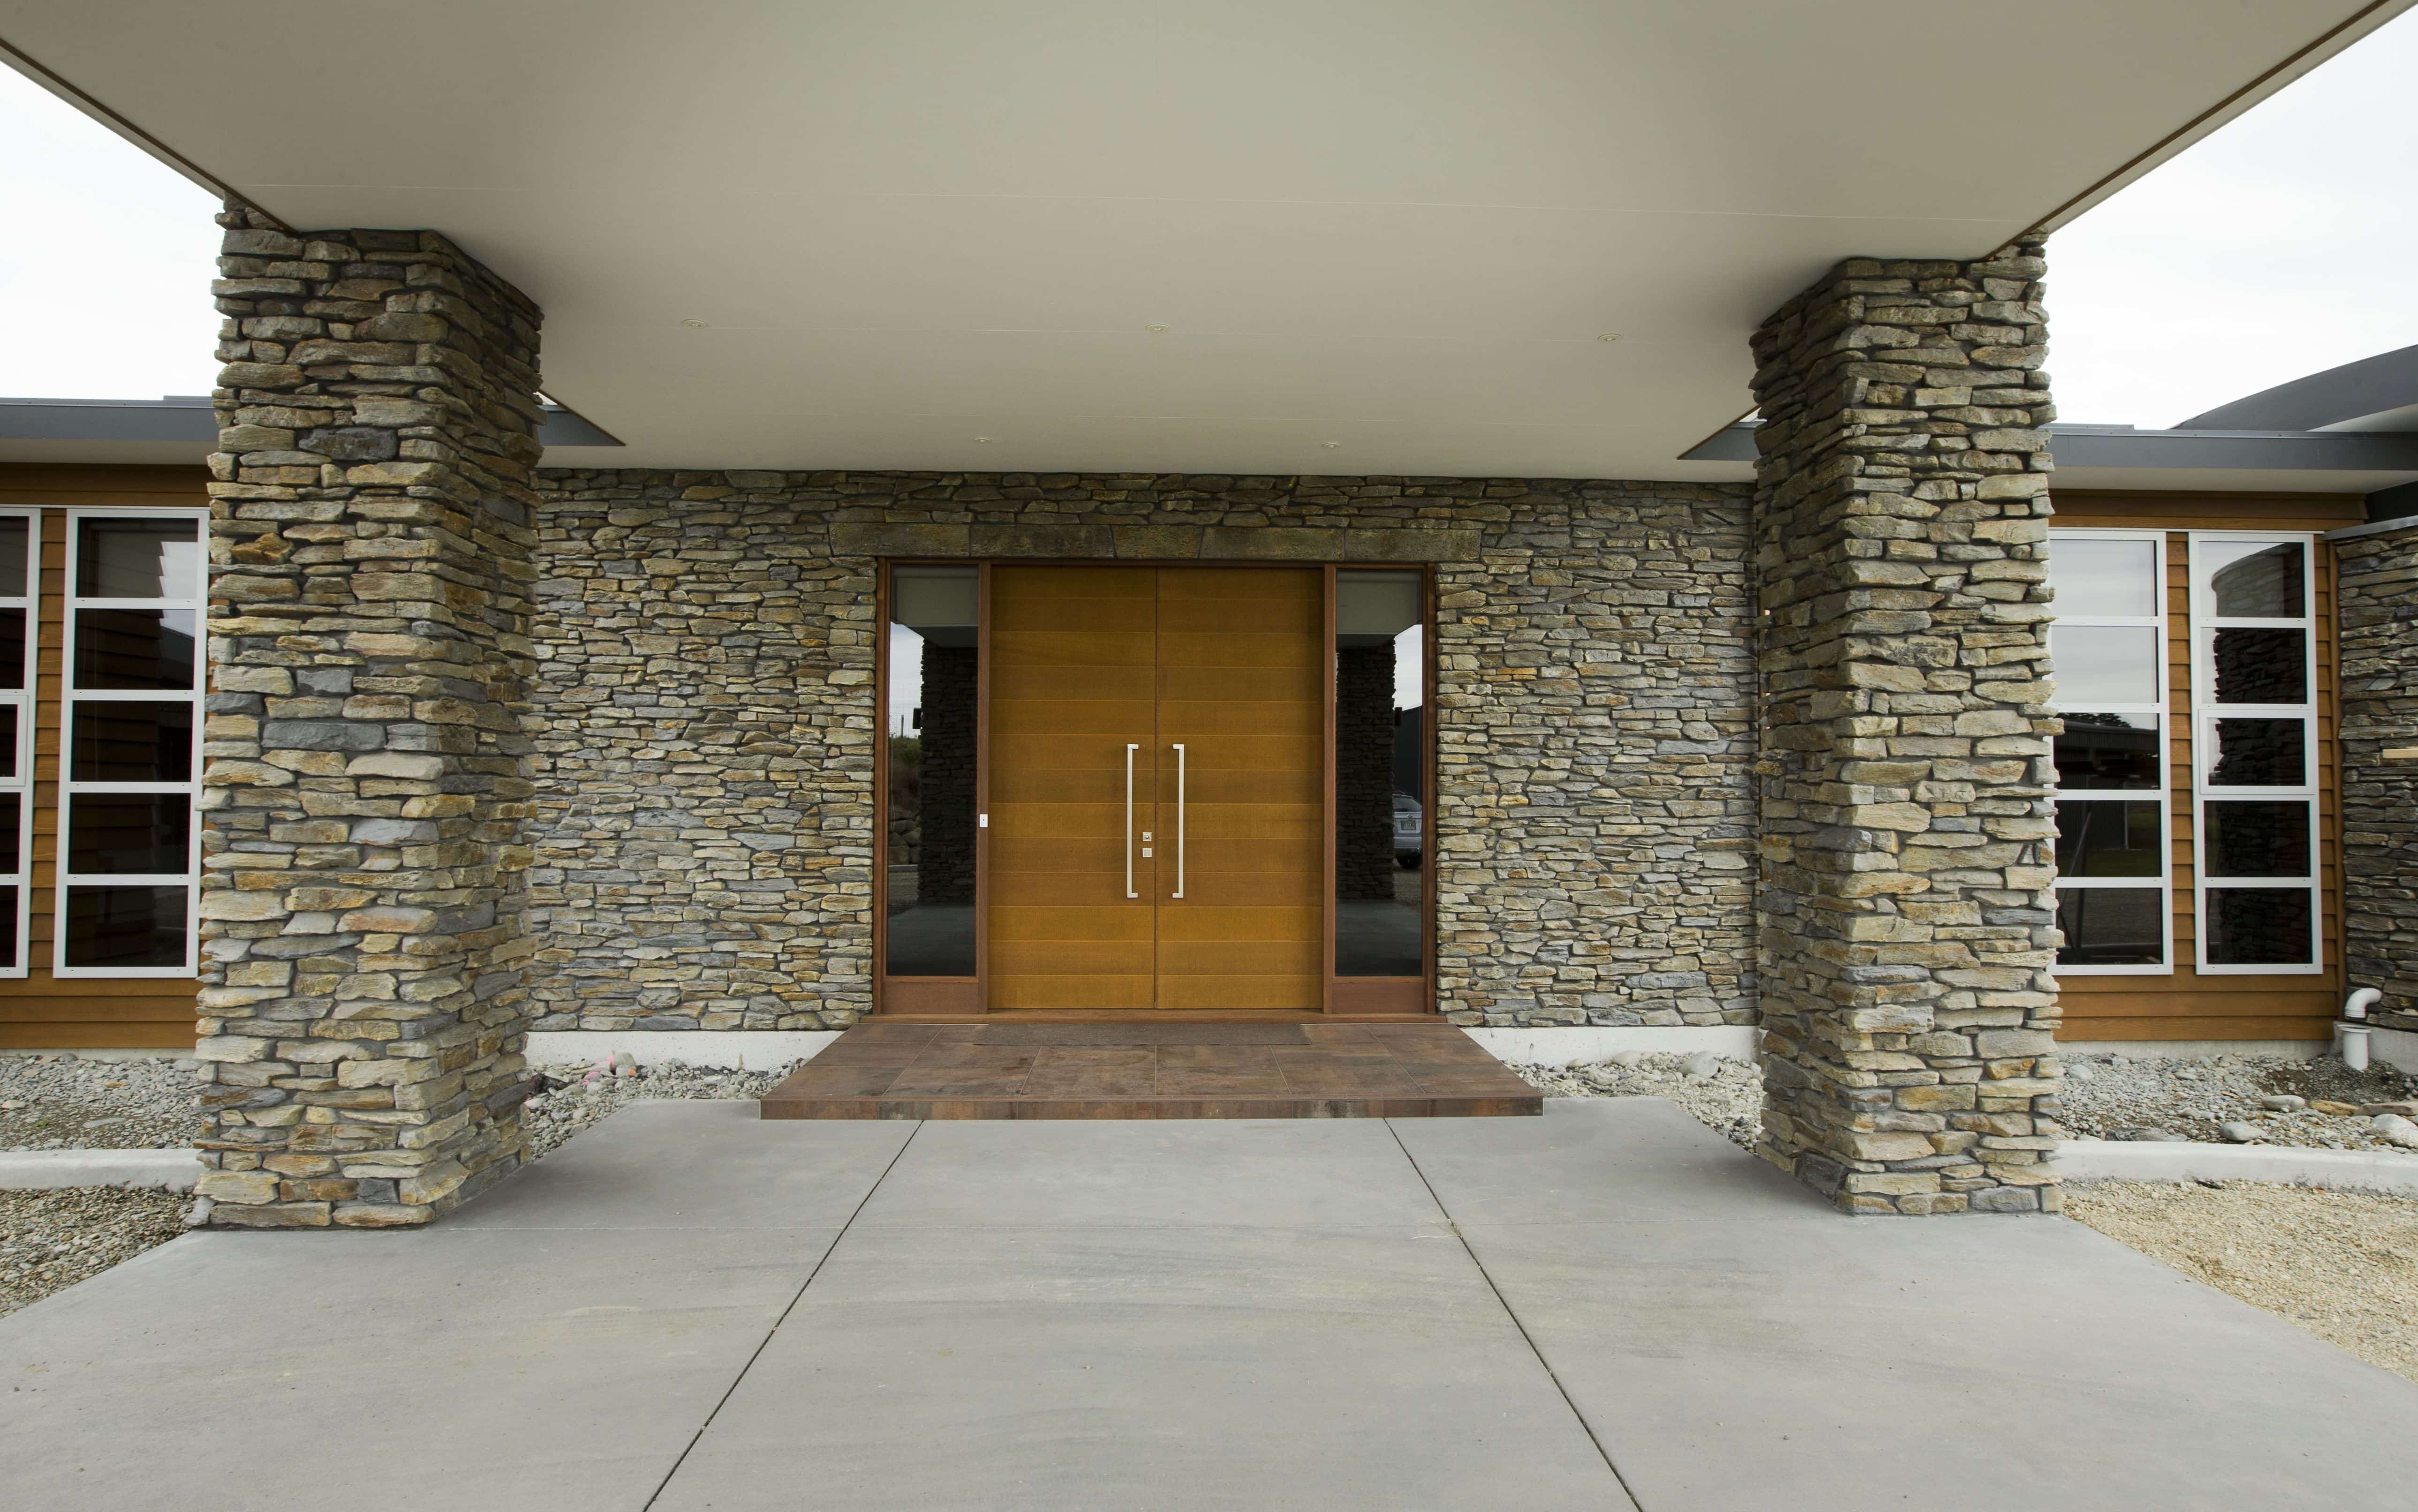  The is a spectacular grand entrance with hand crafted stone work and wooden door